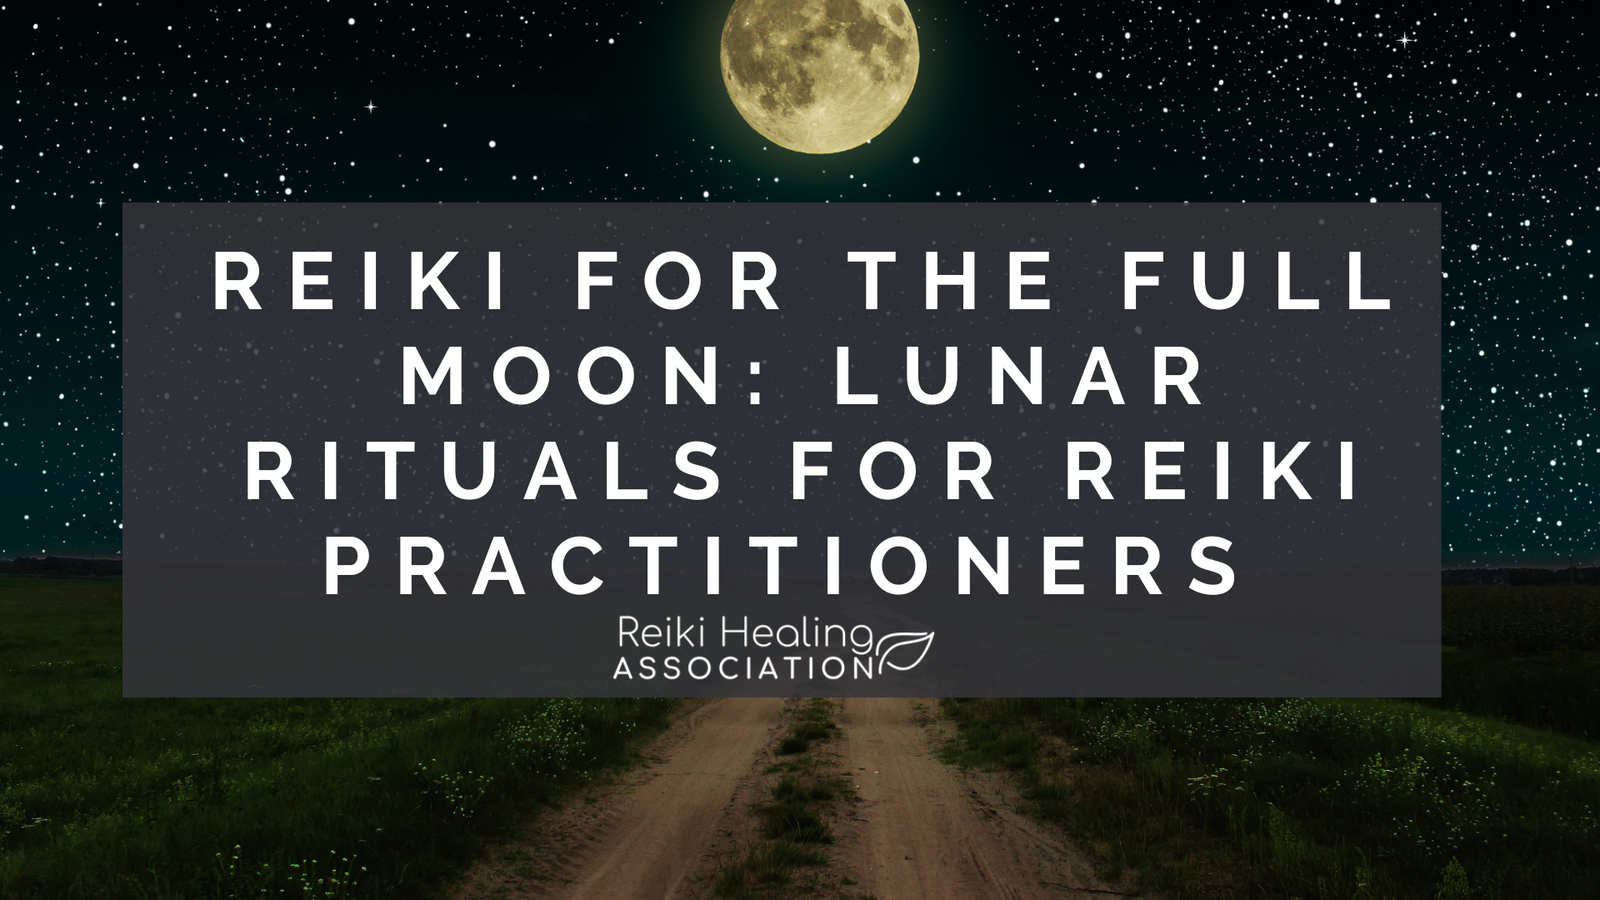 Reiki for the Full Moon: Lunar Rituals for Reiki Practitioners